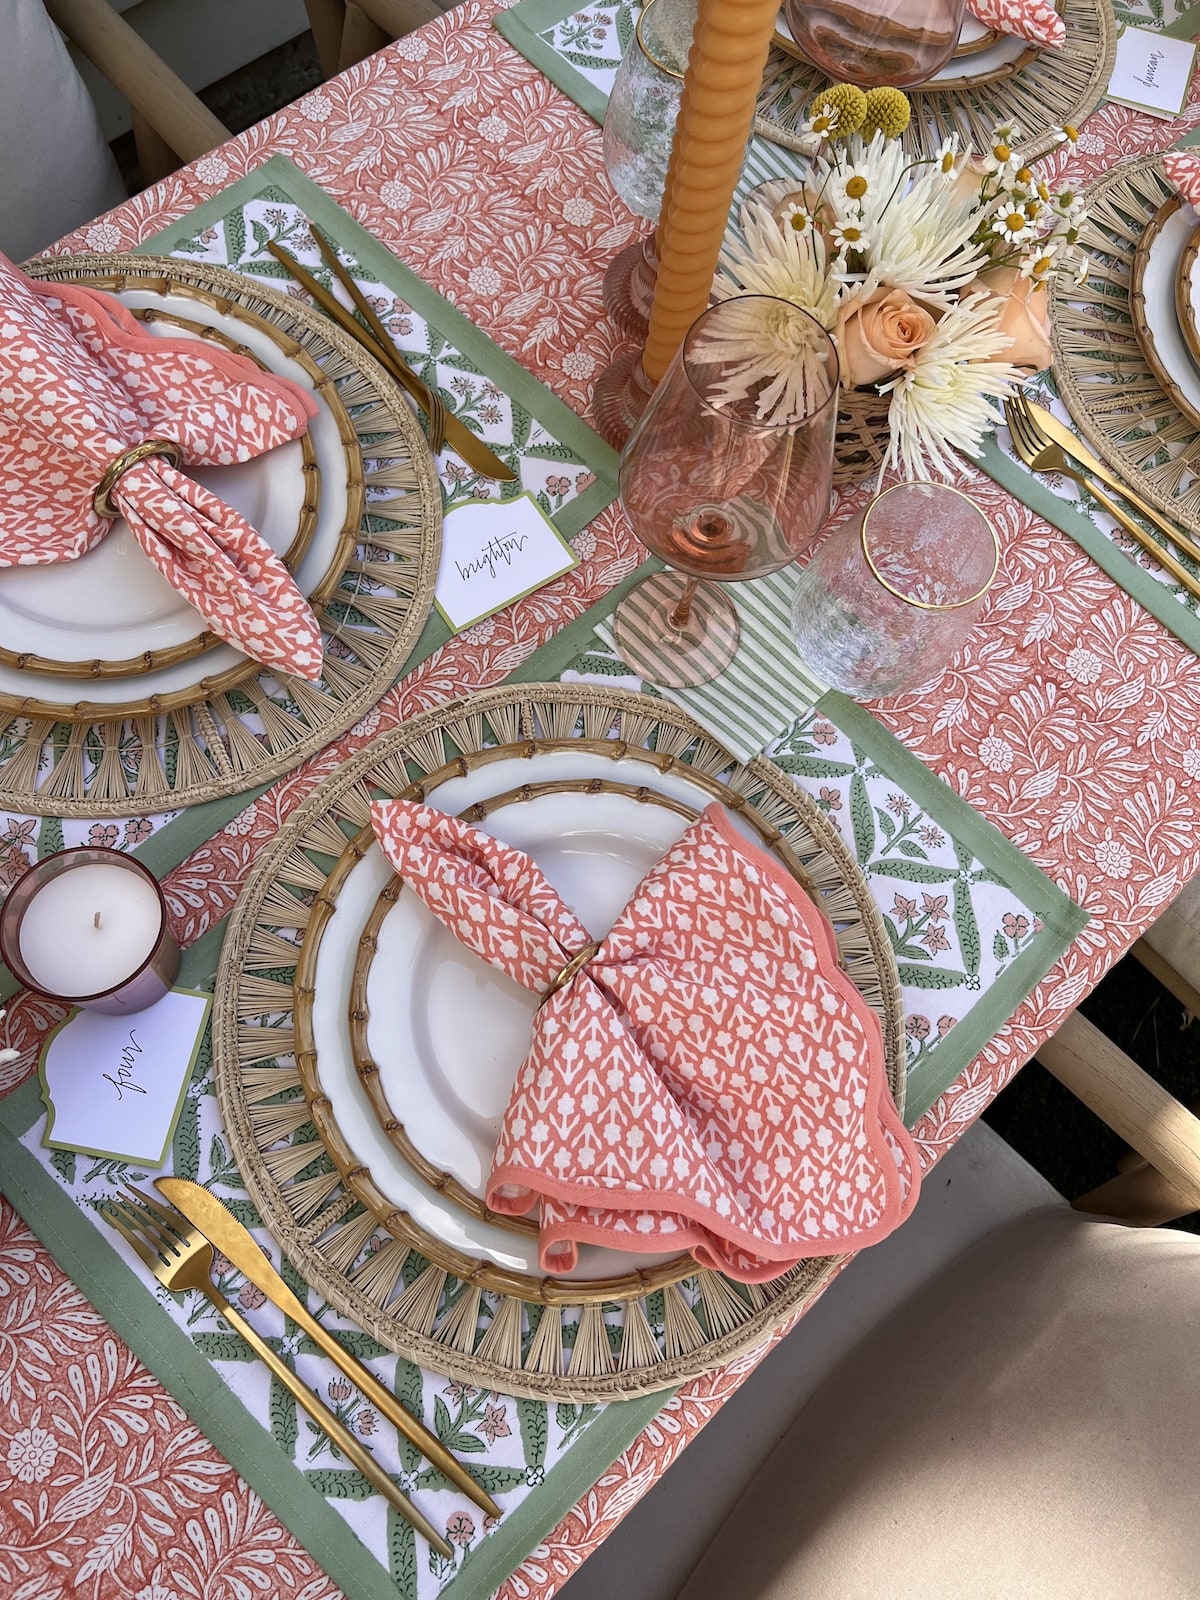 Brighton Butler spring tablescape, coral and green table setting, Amanda lindroth tablecloth, juliska bamboo dinner plates, Estelle wine glasses, gold silverware